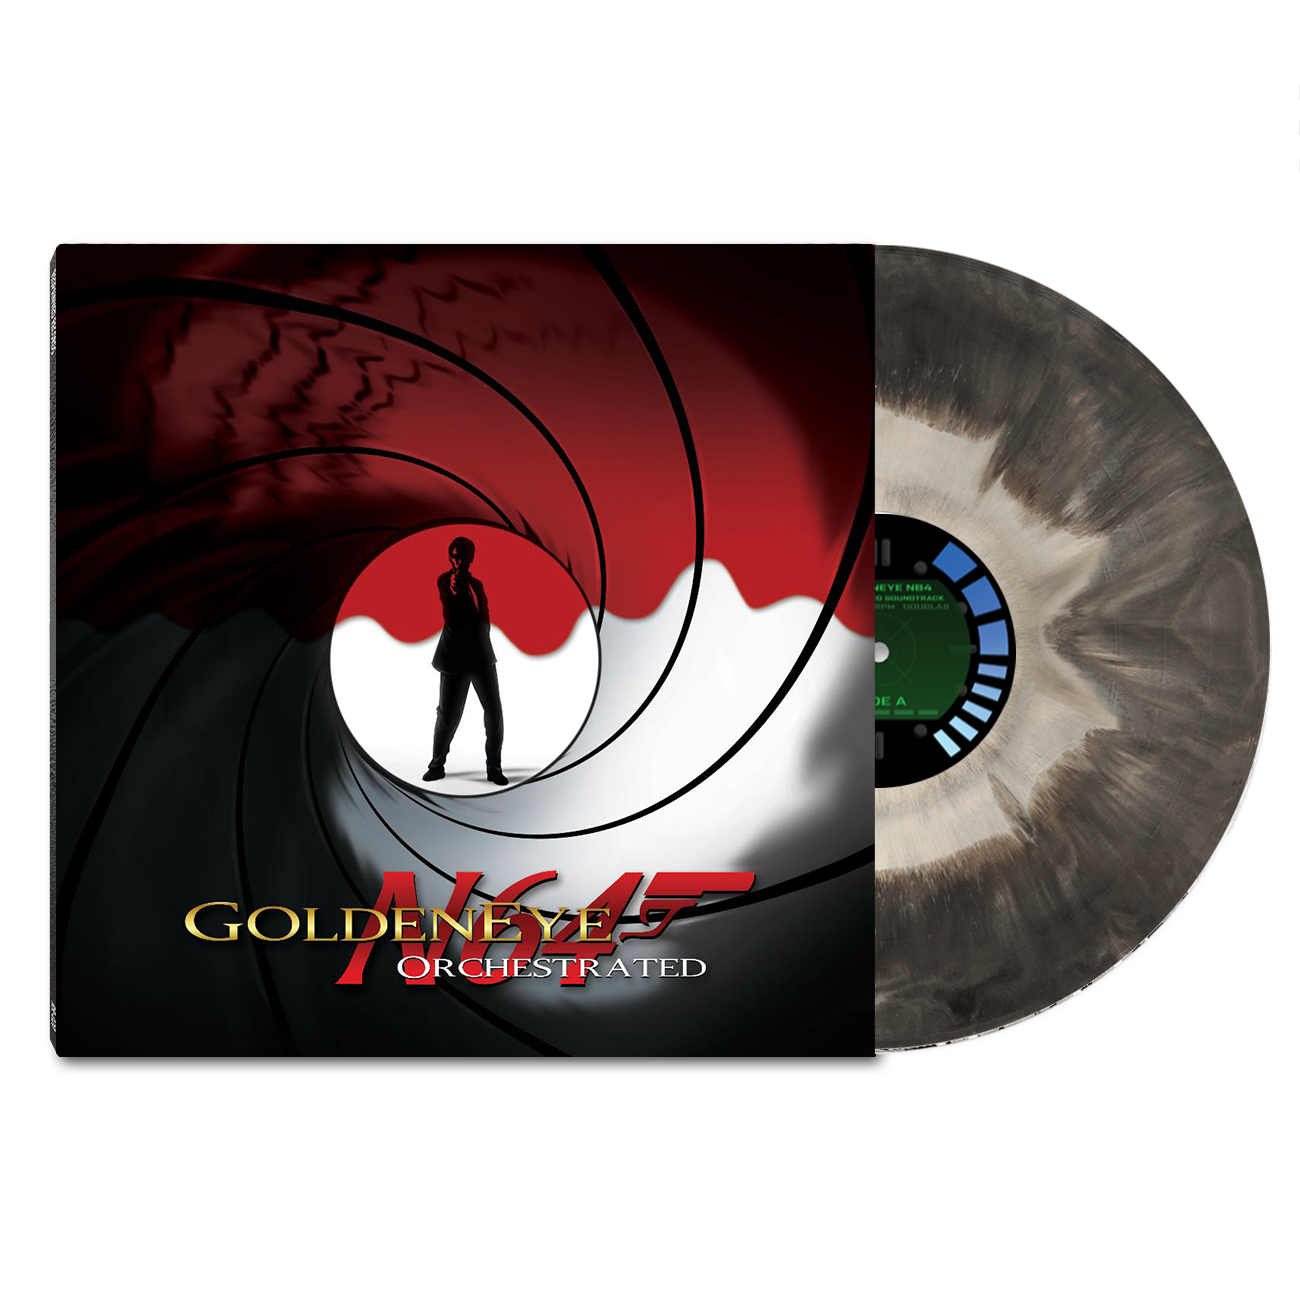 GoldenEye N64 Orchestrated Vinyl Record - Respawned Records